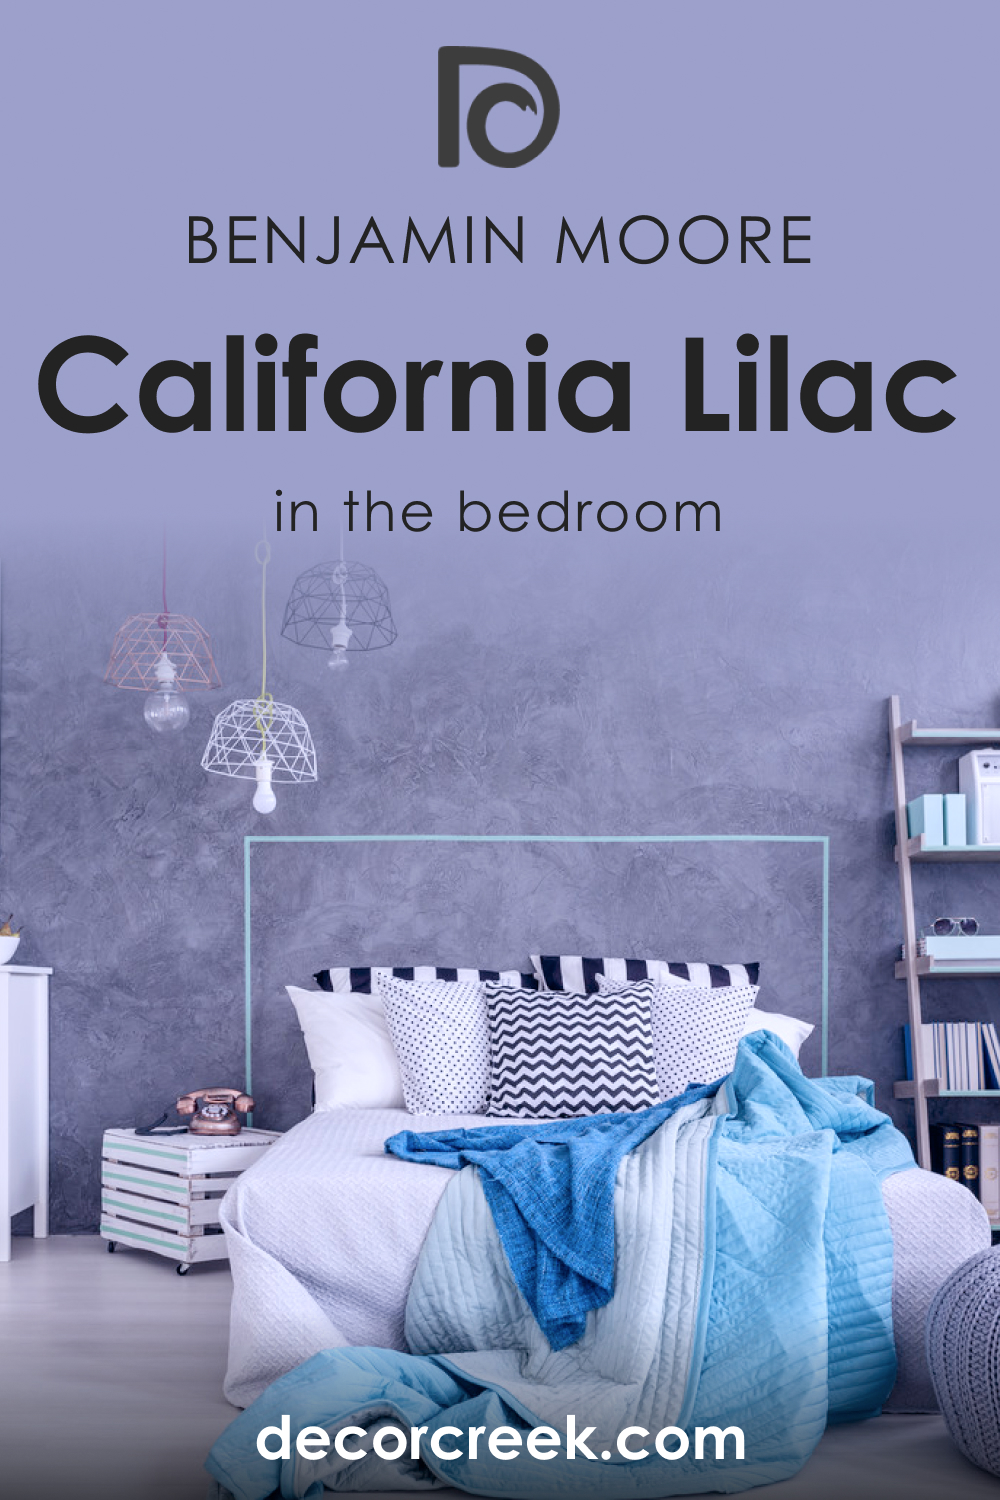 How to Use California Lilac 2068-40 in the Bedroom?